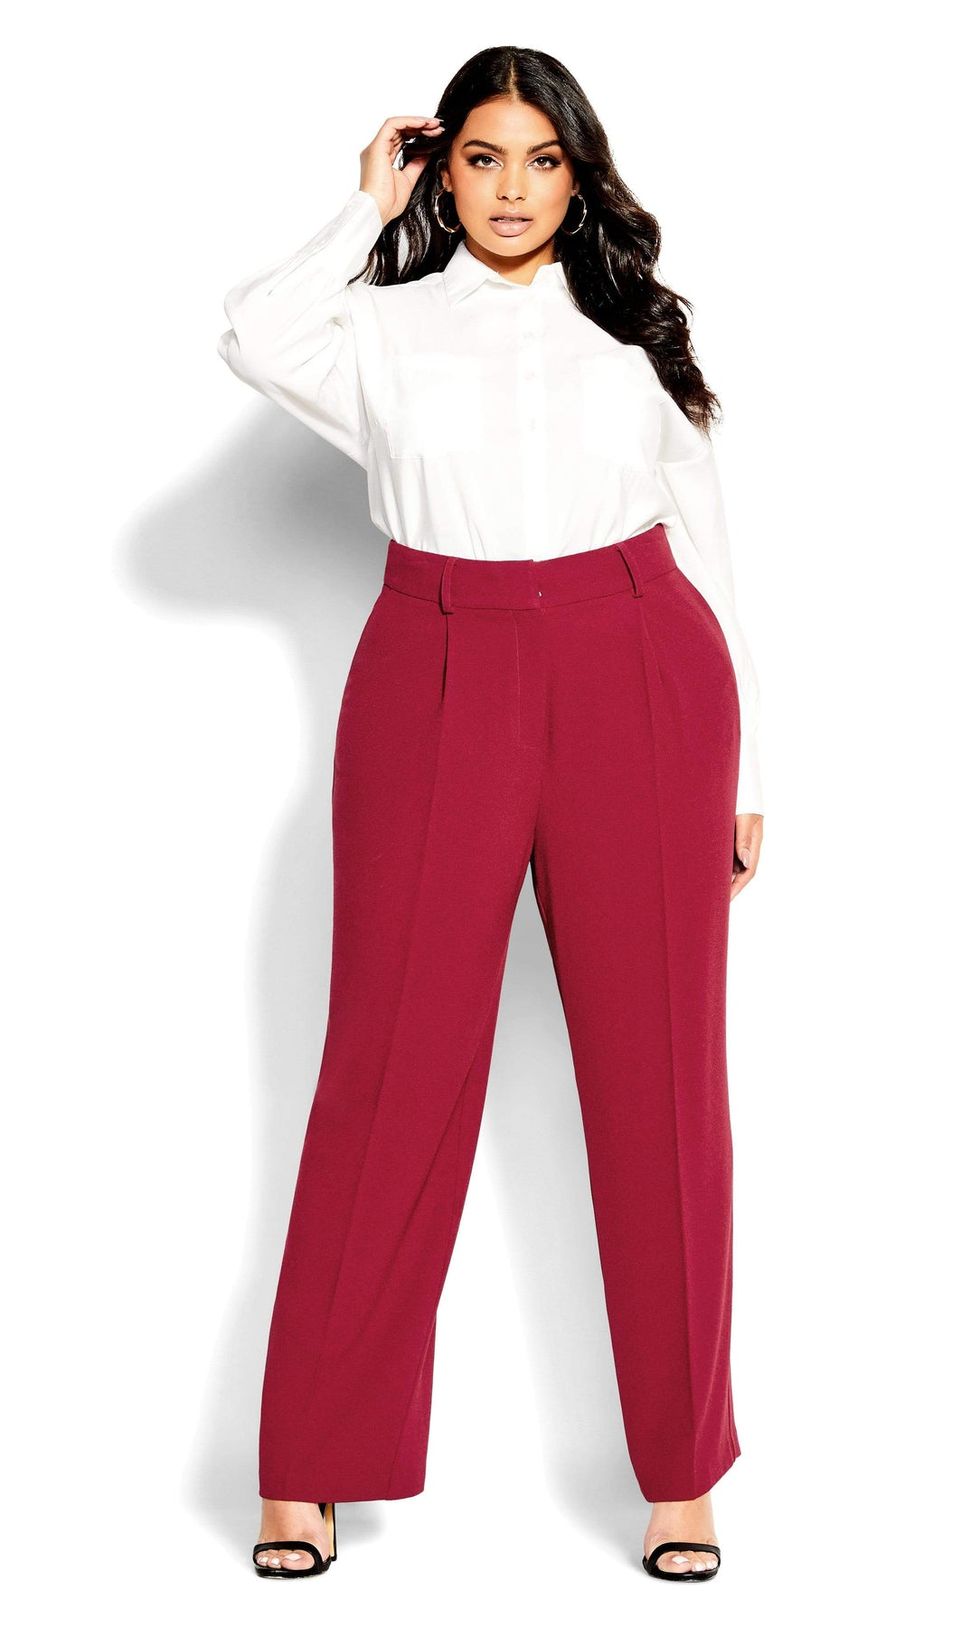 Style Scenario: Wearing red pants that aren't RED PANTS